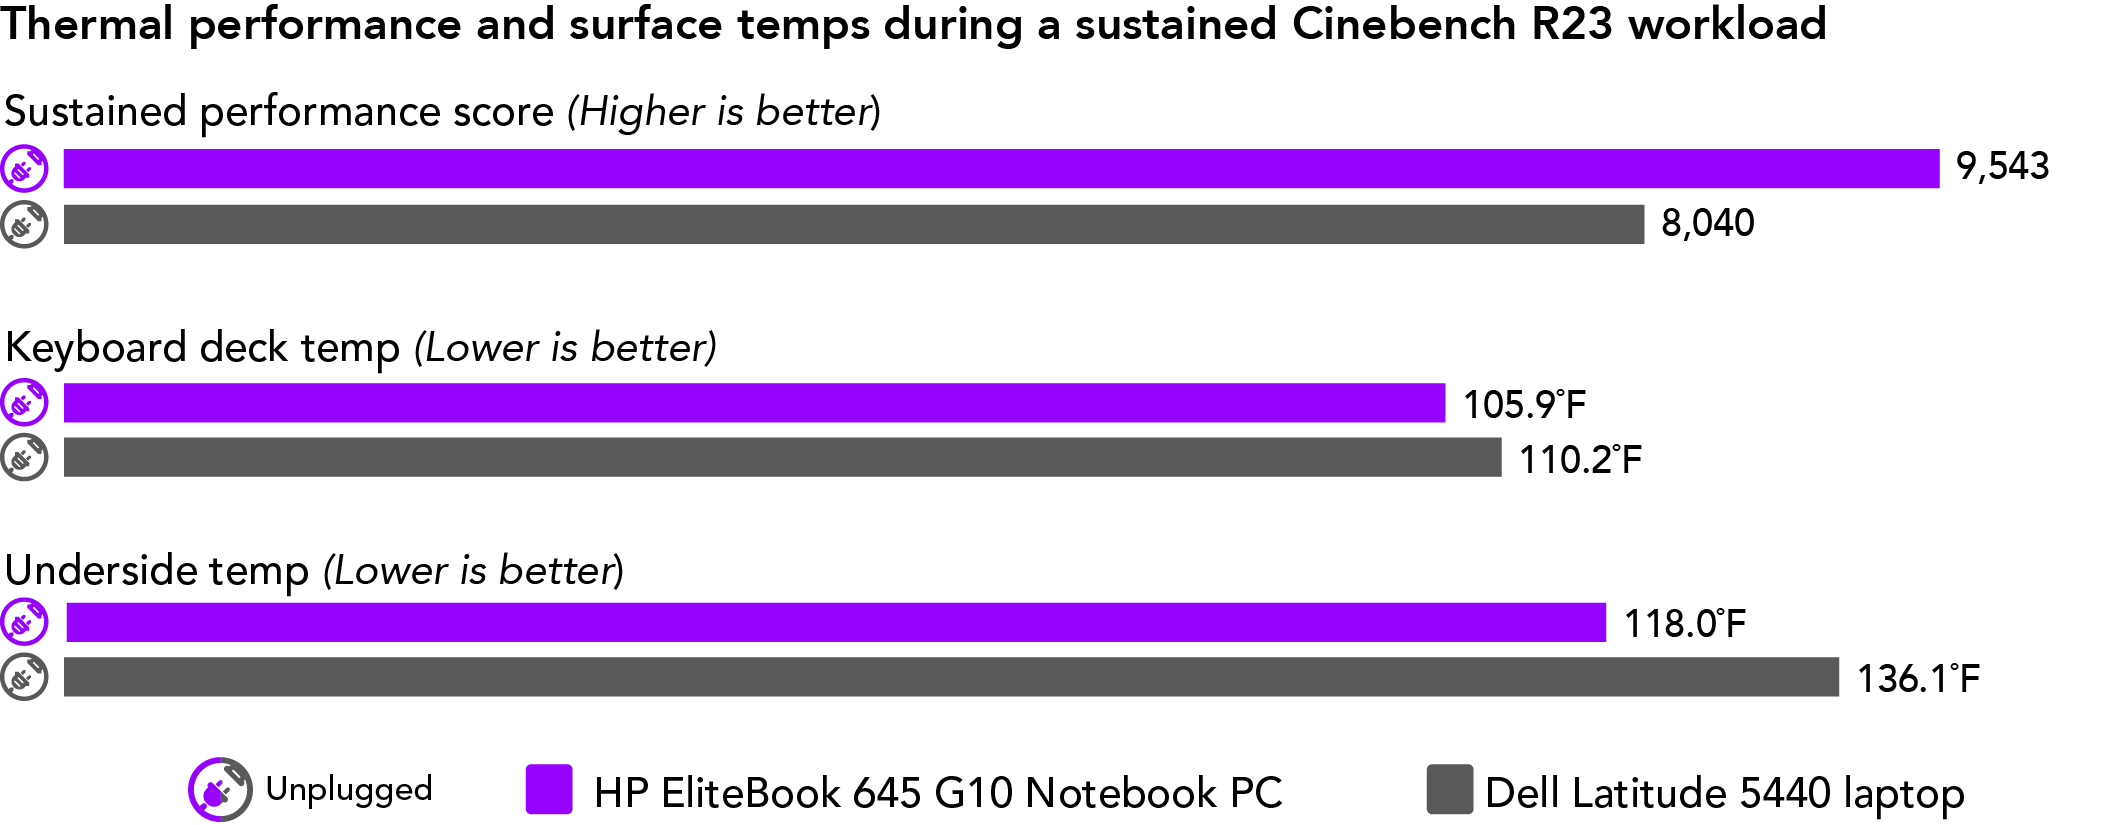 Chart of thermal performance and surface temps during a sustained Cinebench R23 workload. Higher performance scores are better and lower temps are better. HP EliteBook 645 G10 Notebook PC has a sustained score of 9,543, keyboard deck temp of 105.9 degrees Fahrenheit, and underside temp of 118.0 degrees Fahrenheit. Dell Latitude 5440 laptop has a sustained score of 8,040, keyboard deck temp of 110.2 degrees Fahrenheit, and underside temp of 136.1 degrees Fahrenheit.